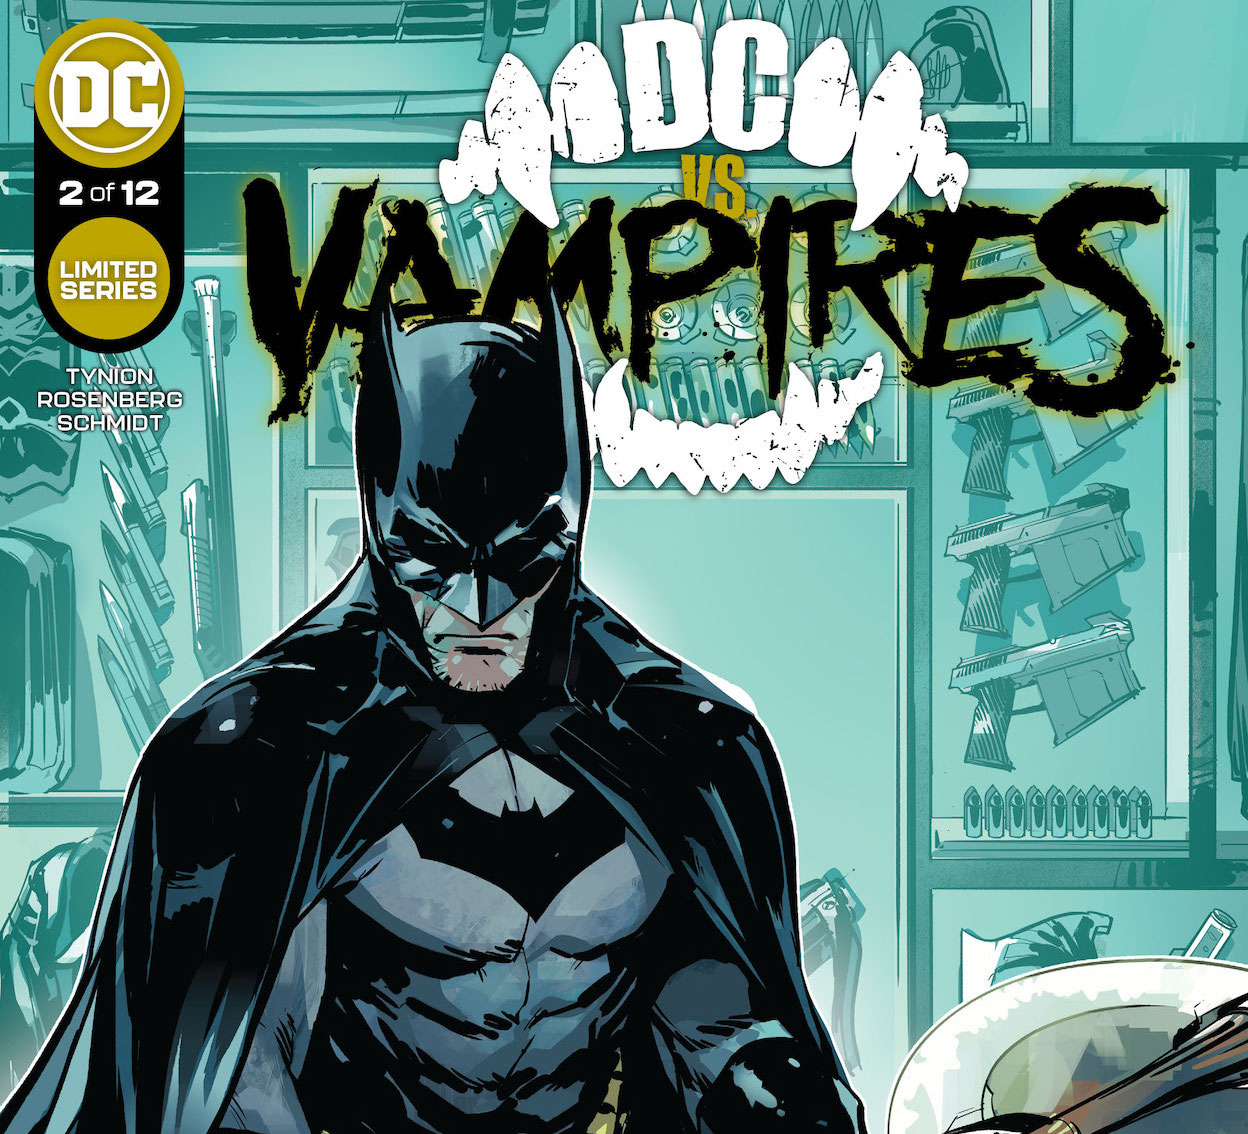 'DC vs. Vampires' #2 features great character writing